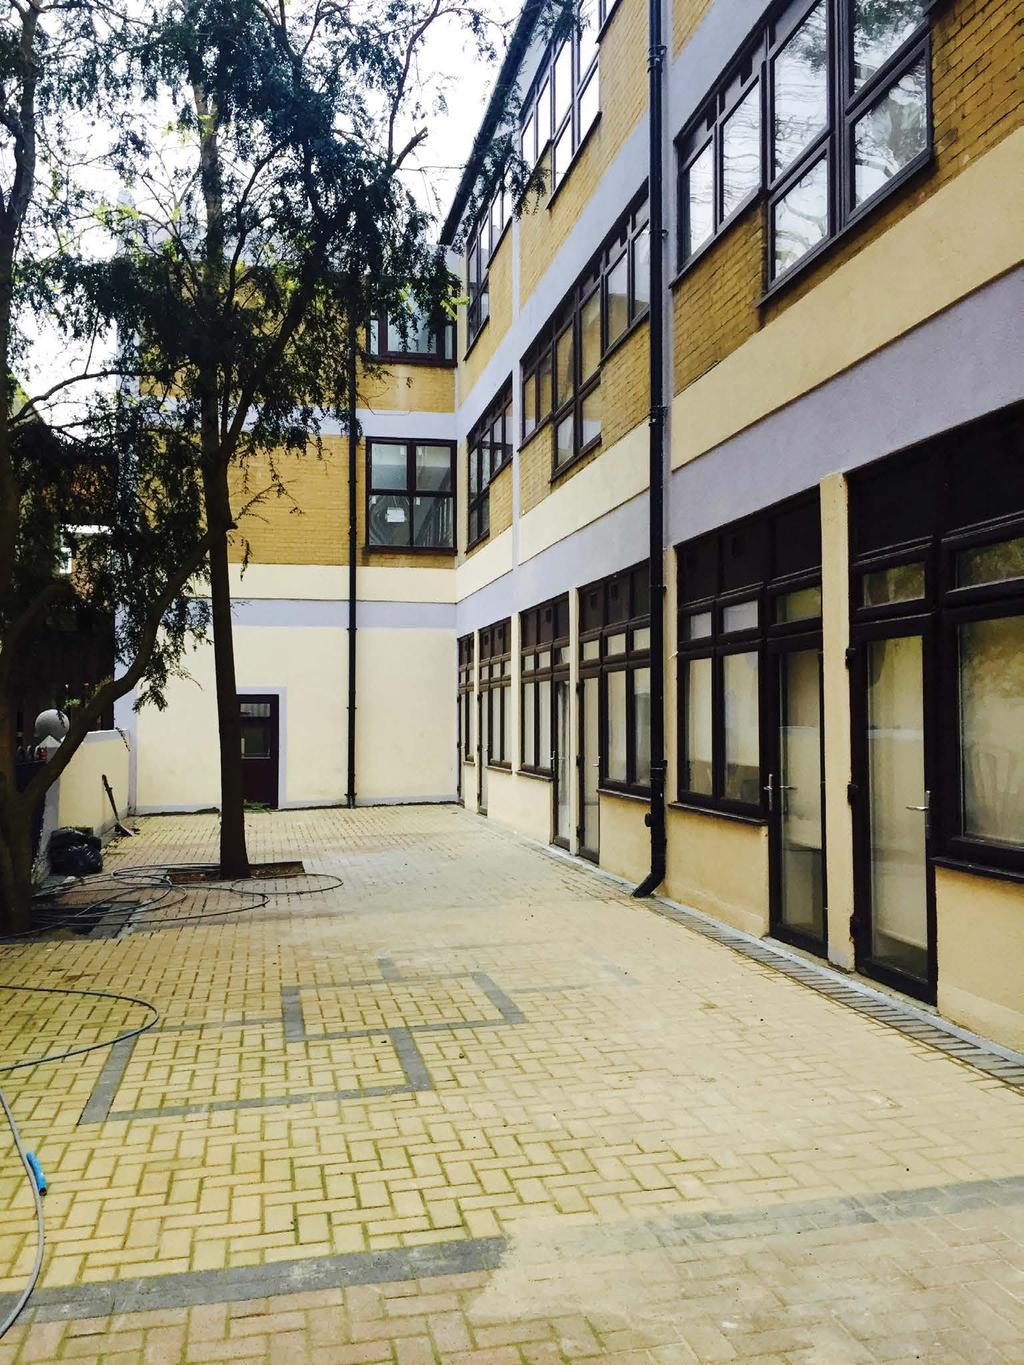 TENANCY New lease on the entire building (53 apartments) dated 22nd October 2015 to Theori Investments Ltd for a term of 5 years.